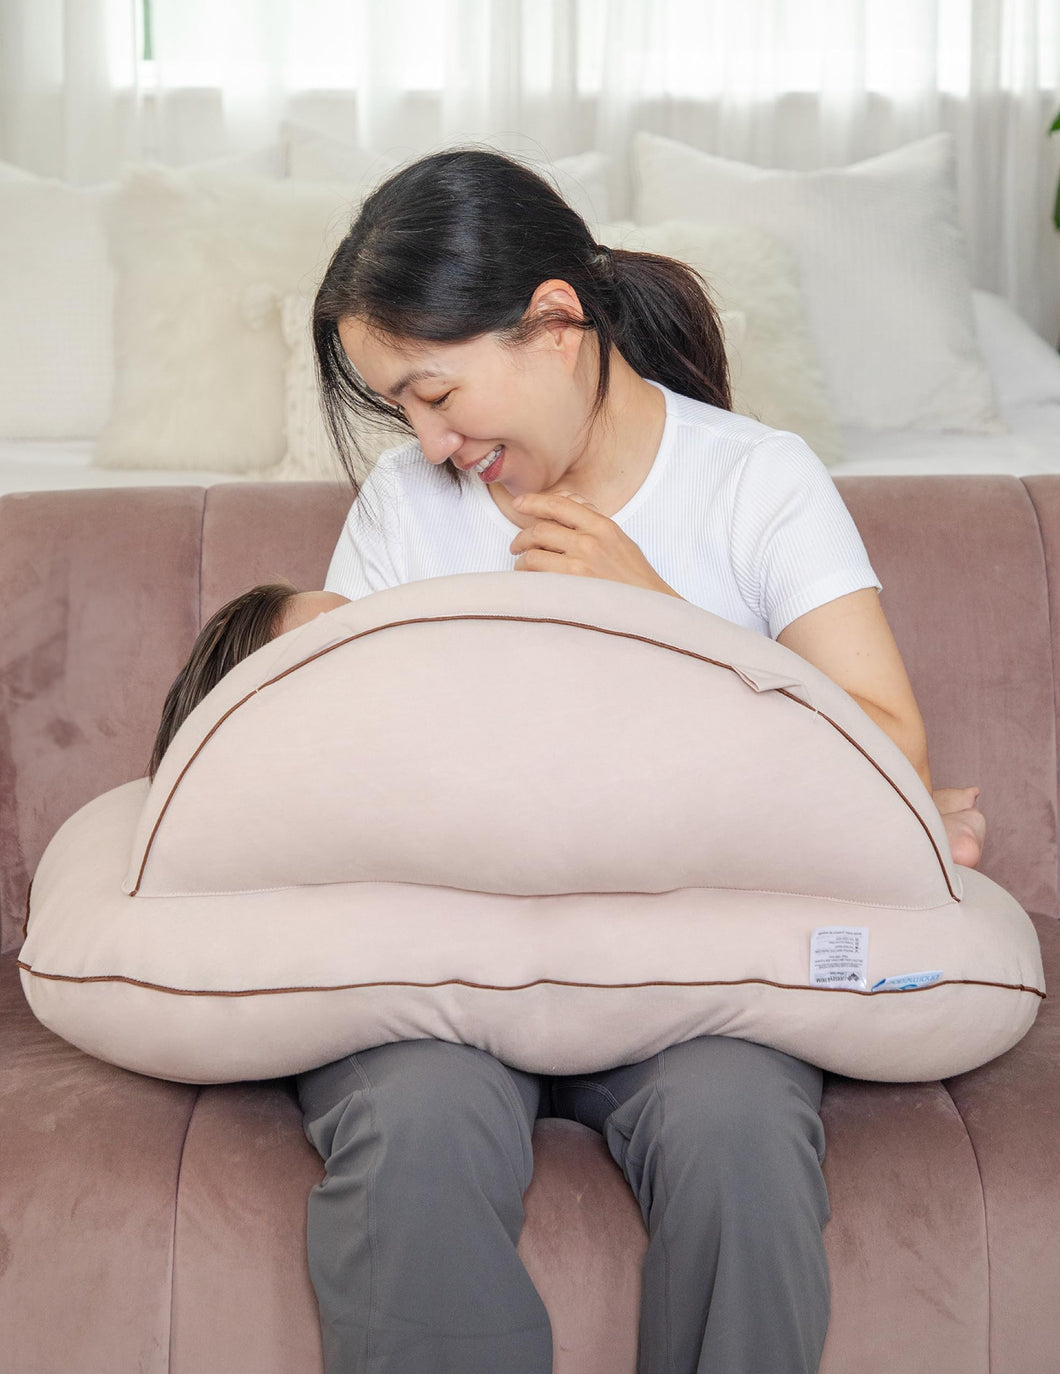 Pharmedoc Nursing Pillow for Breastfeeding - With Safety Bumper & Adjustable Waist Straps - Removable Cover